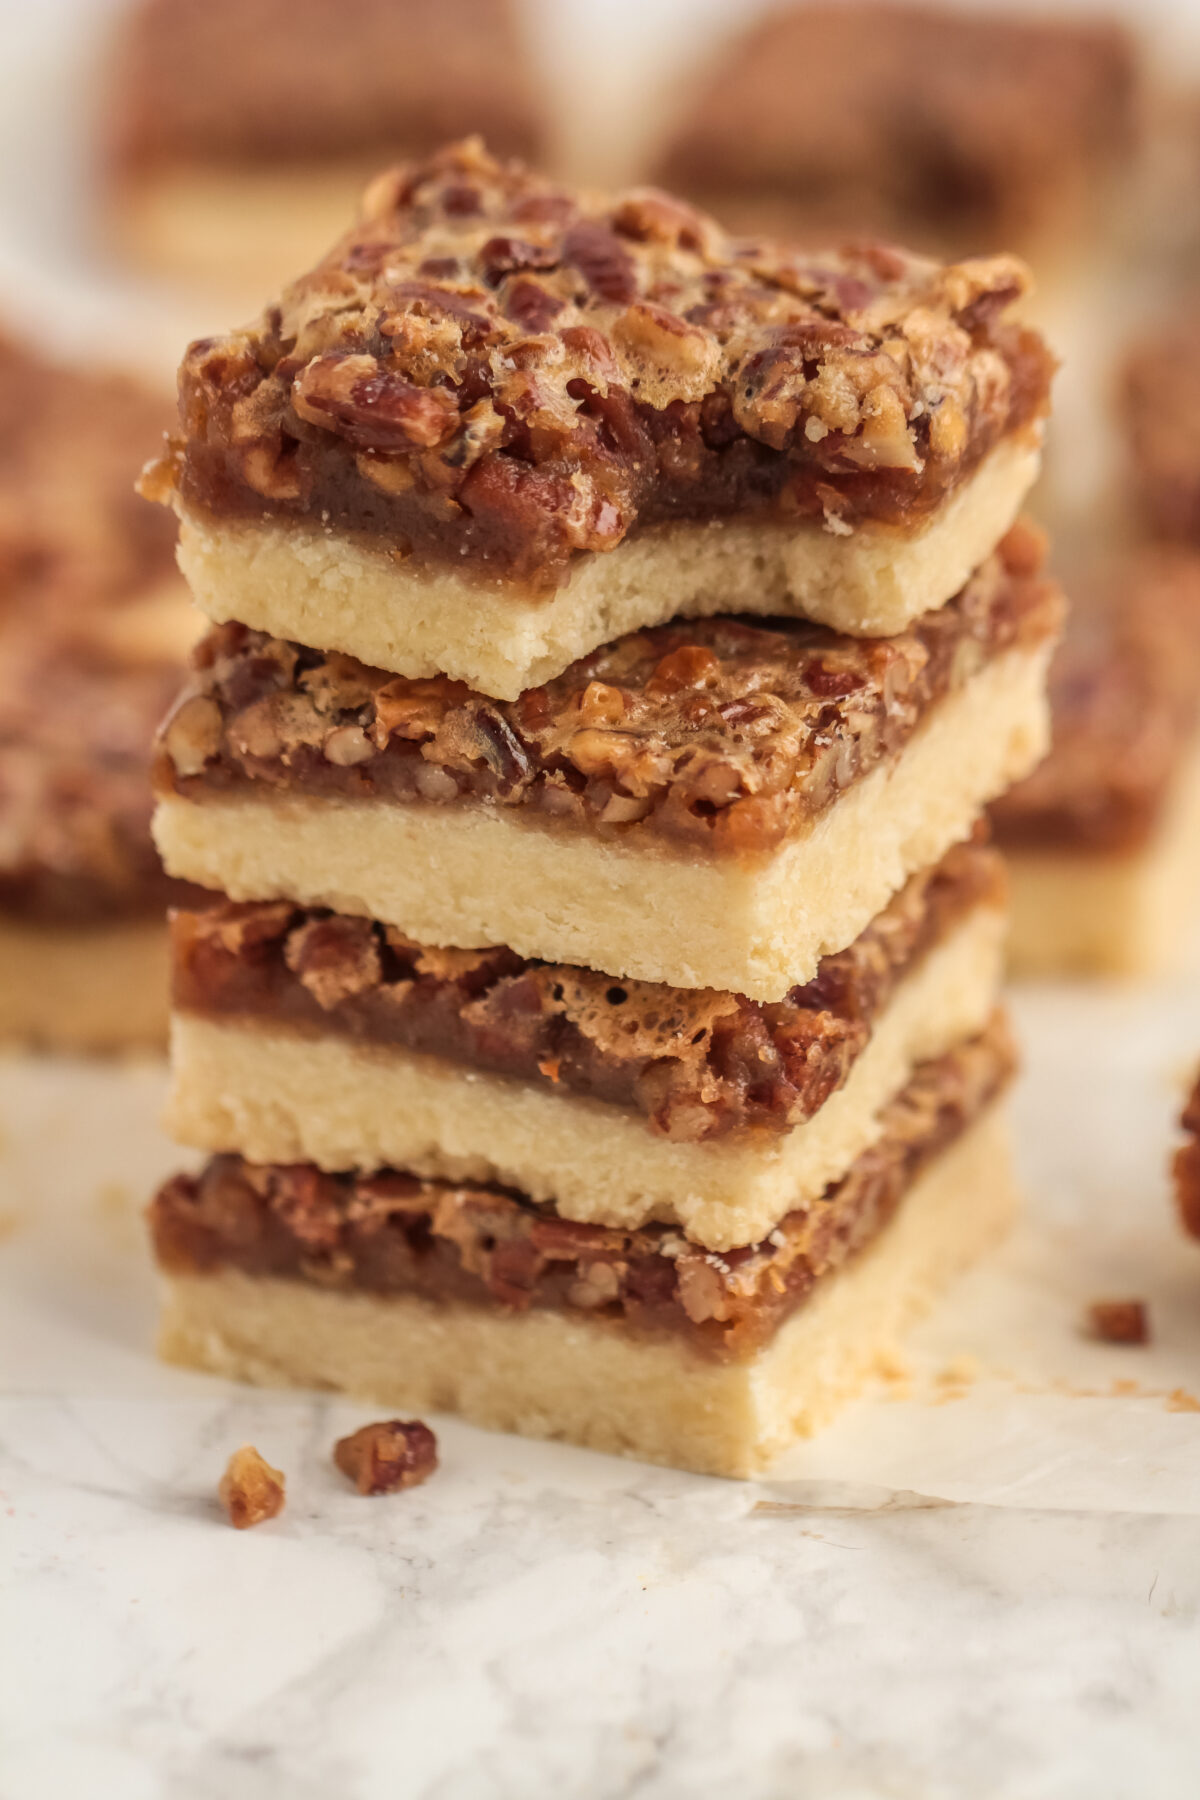 This recipe for pecan pie bars is a huge crowd pleaser. They're deliciously sweet & salty with an easy shortbread crust. Plus NO Corn Syrup!